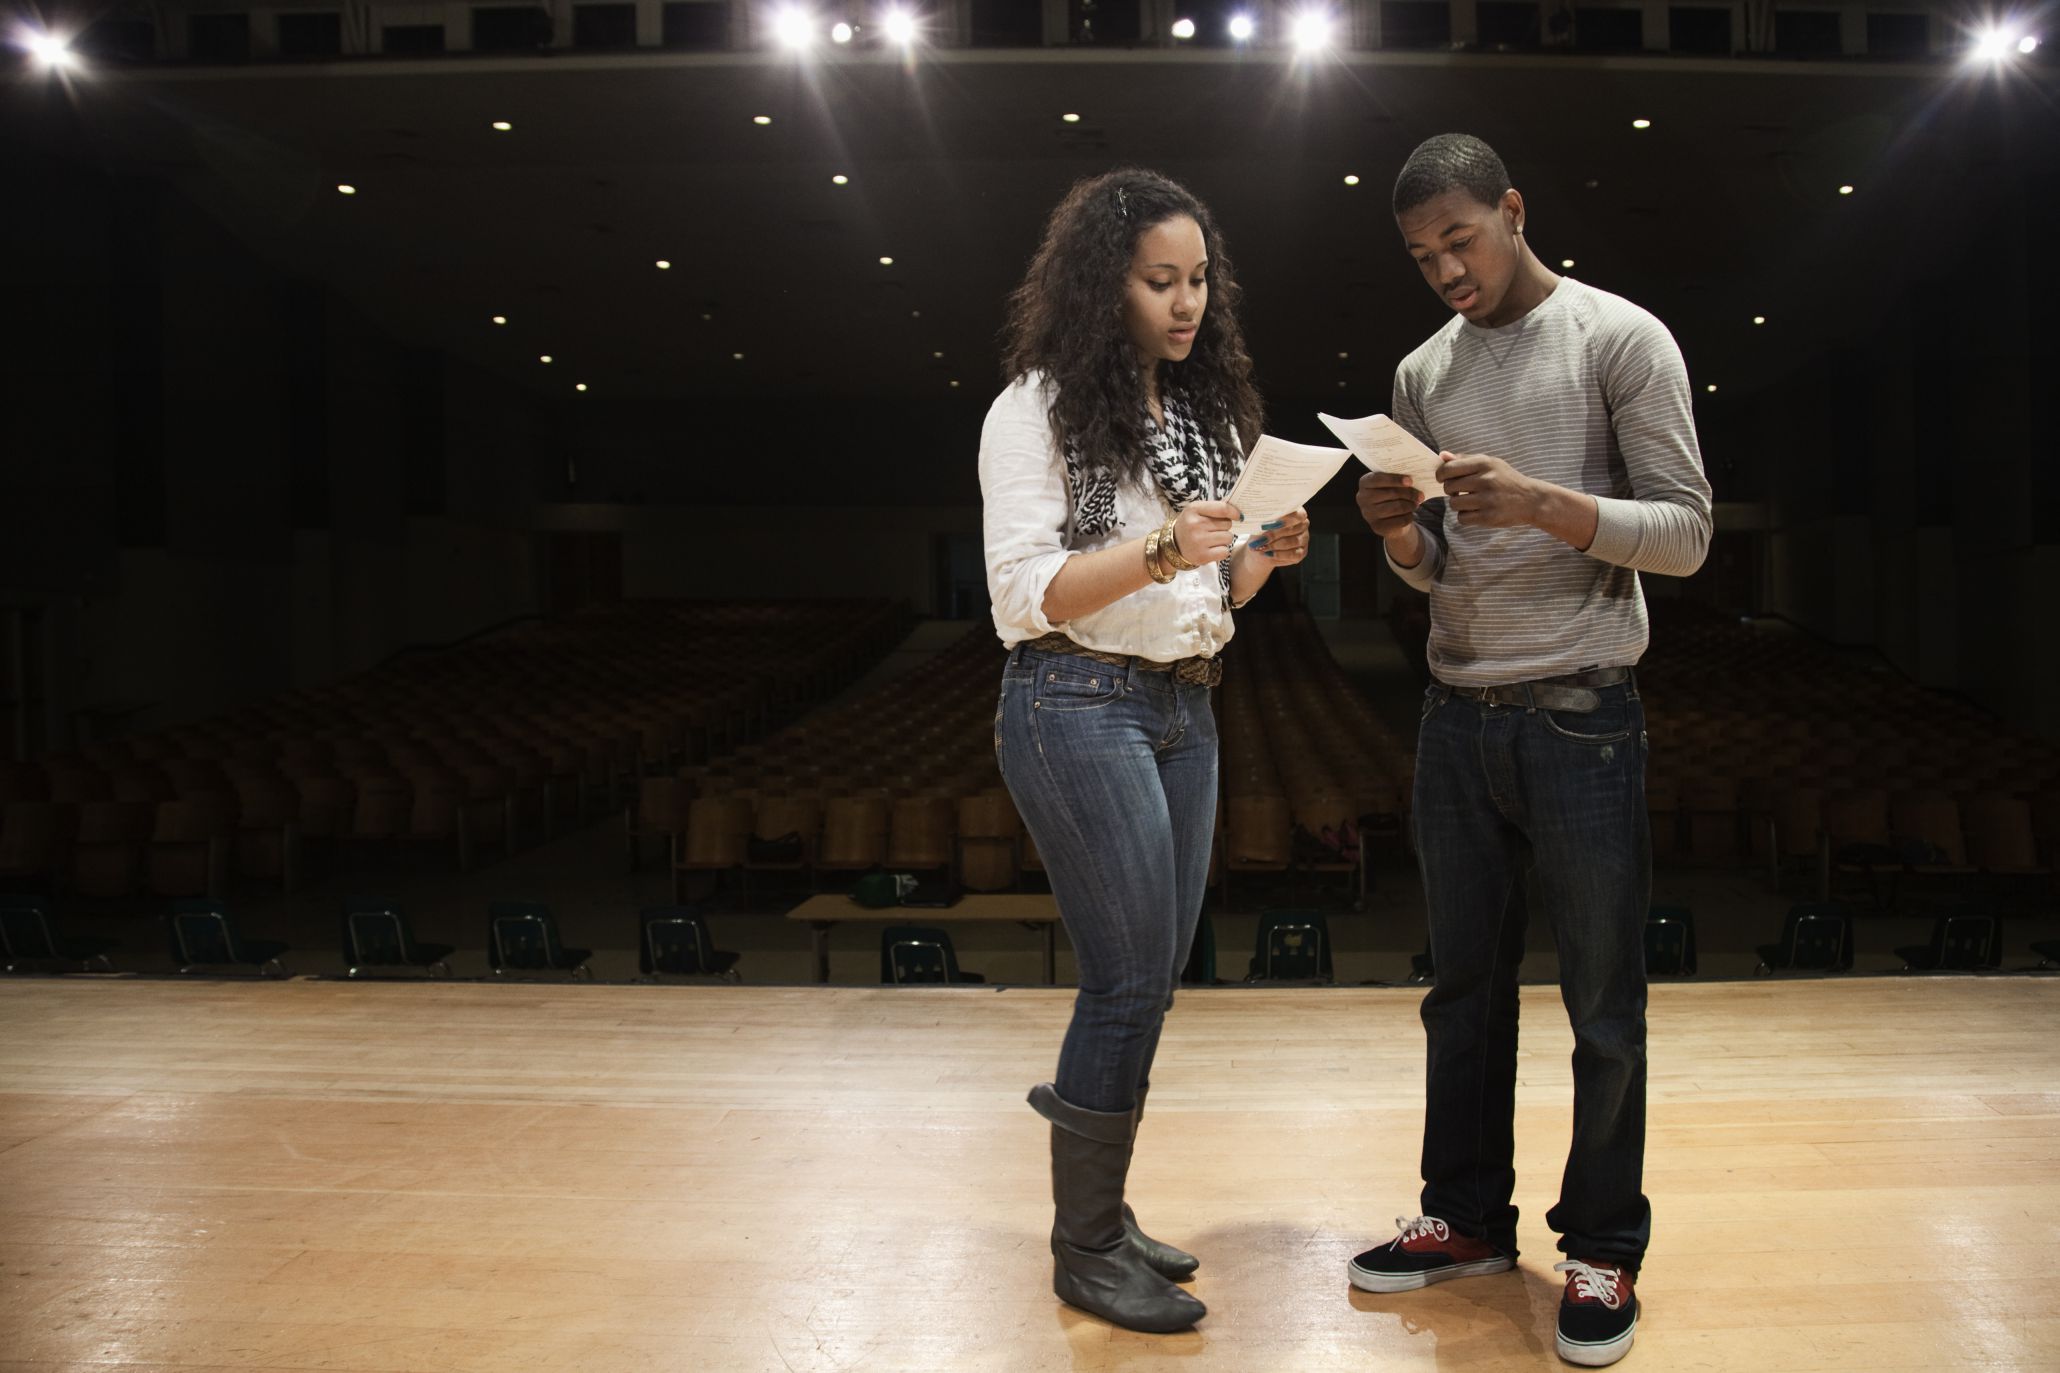 A teenage girl and boy stand on a stage reading their scripts. Stage lights and seats in the background.